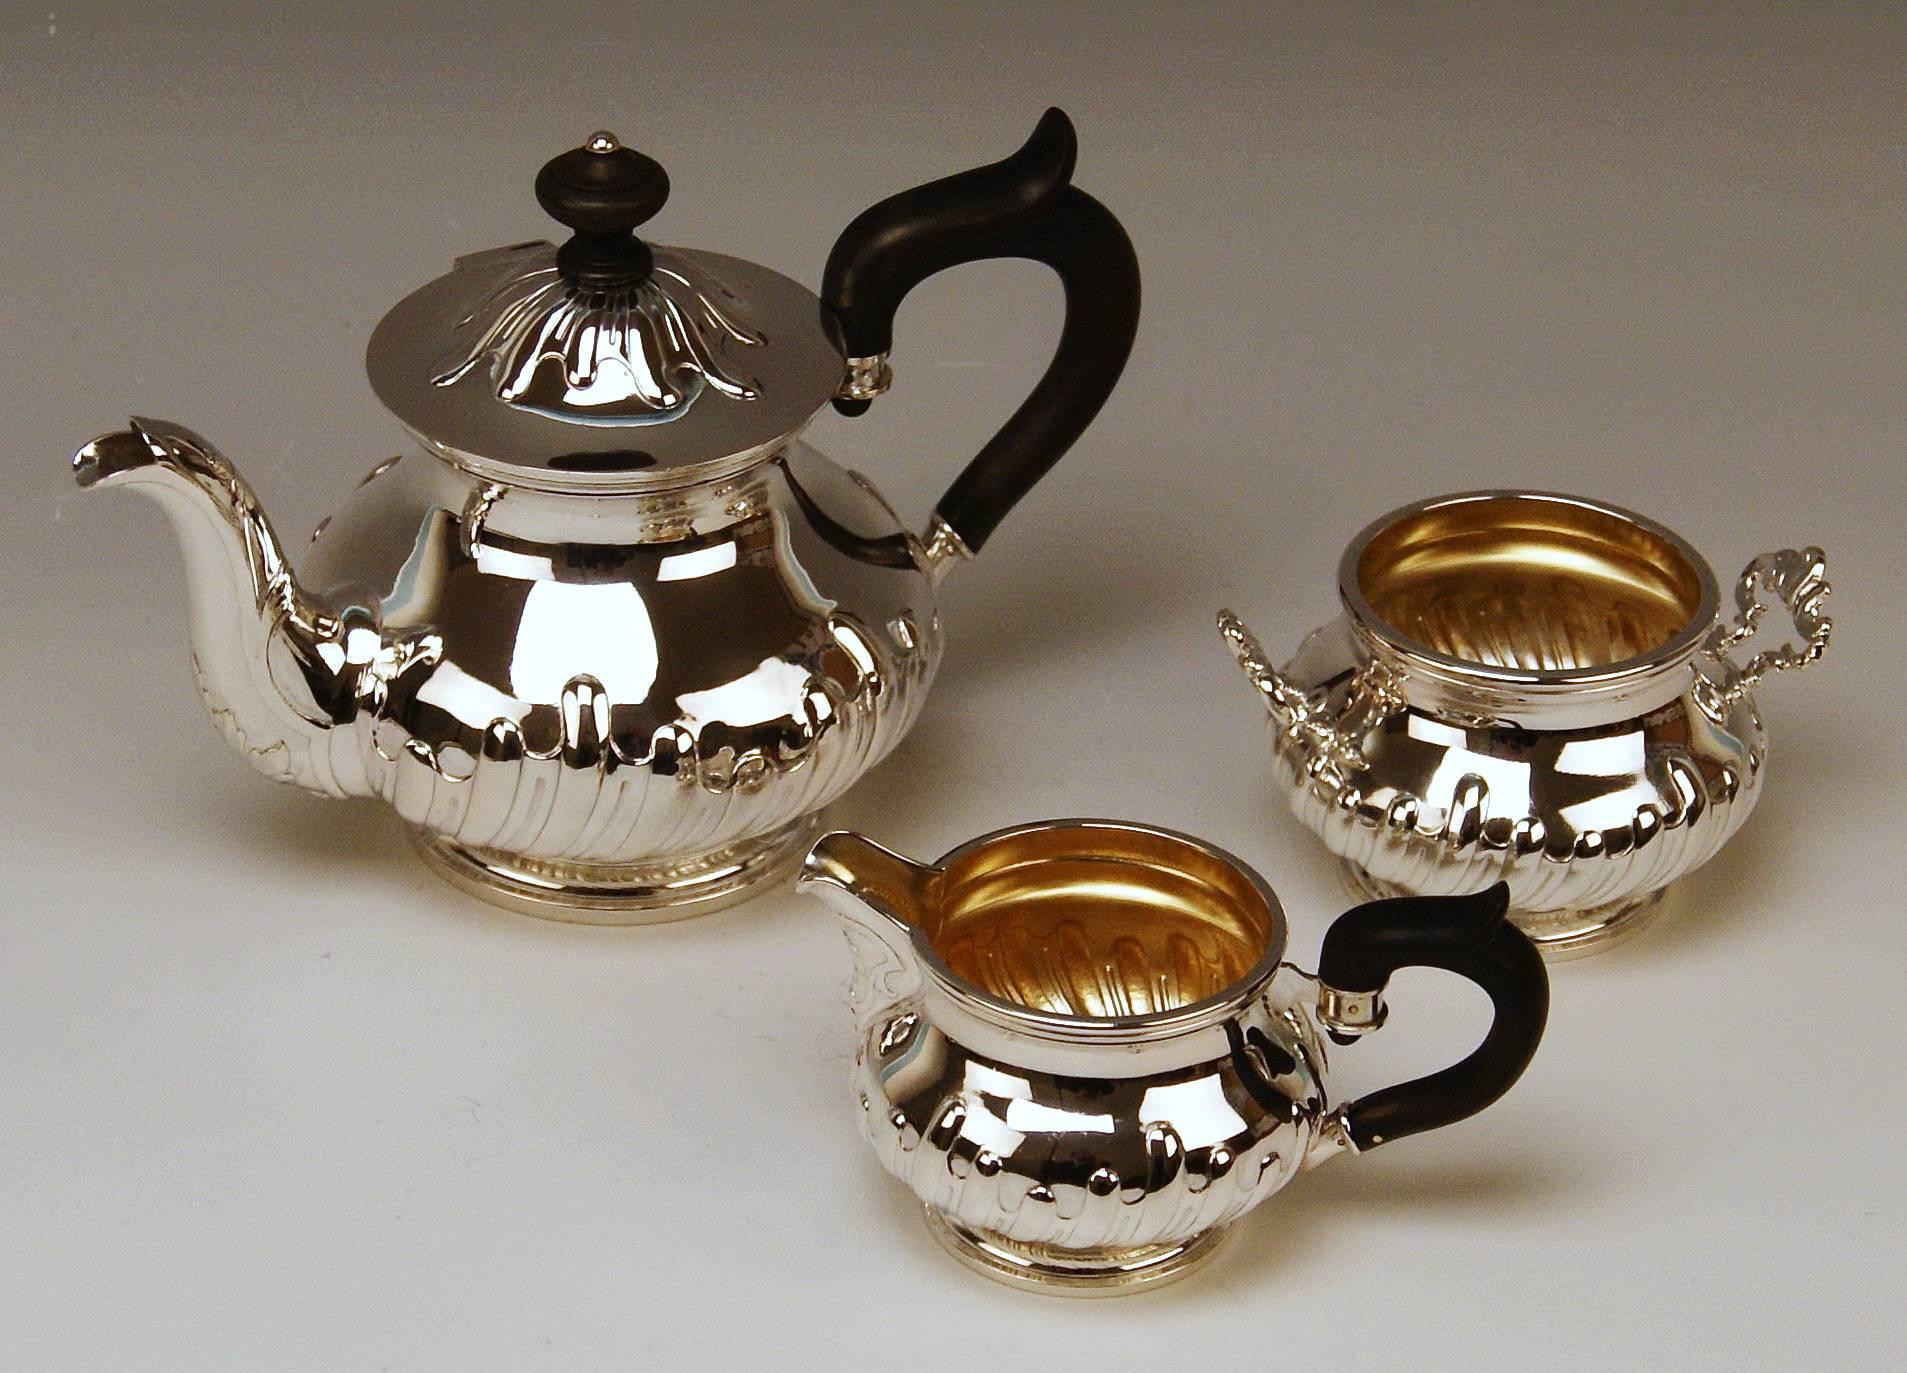 Silver Austrian gorgeous set of most elegant appearance:
-- Tea pot
-- Creamer
-- Sugar bowl
Manufactured circa 1870-1880

Items of this set are manufactured in baroque style which was typical for Viennese Historicism having taken place during